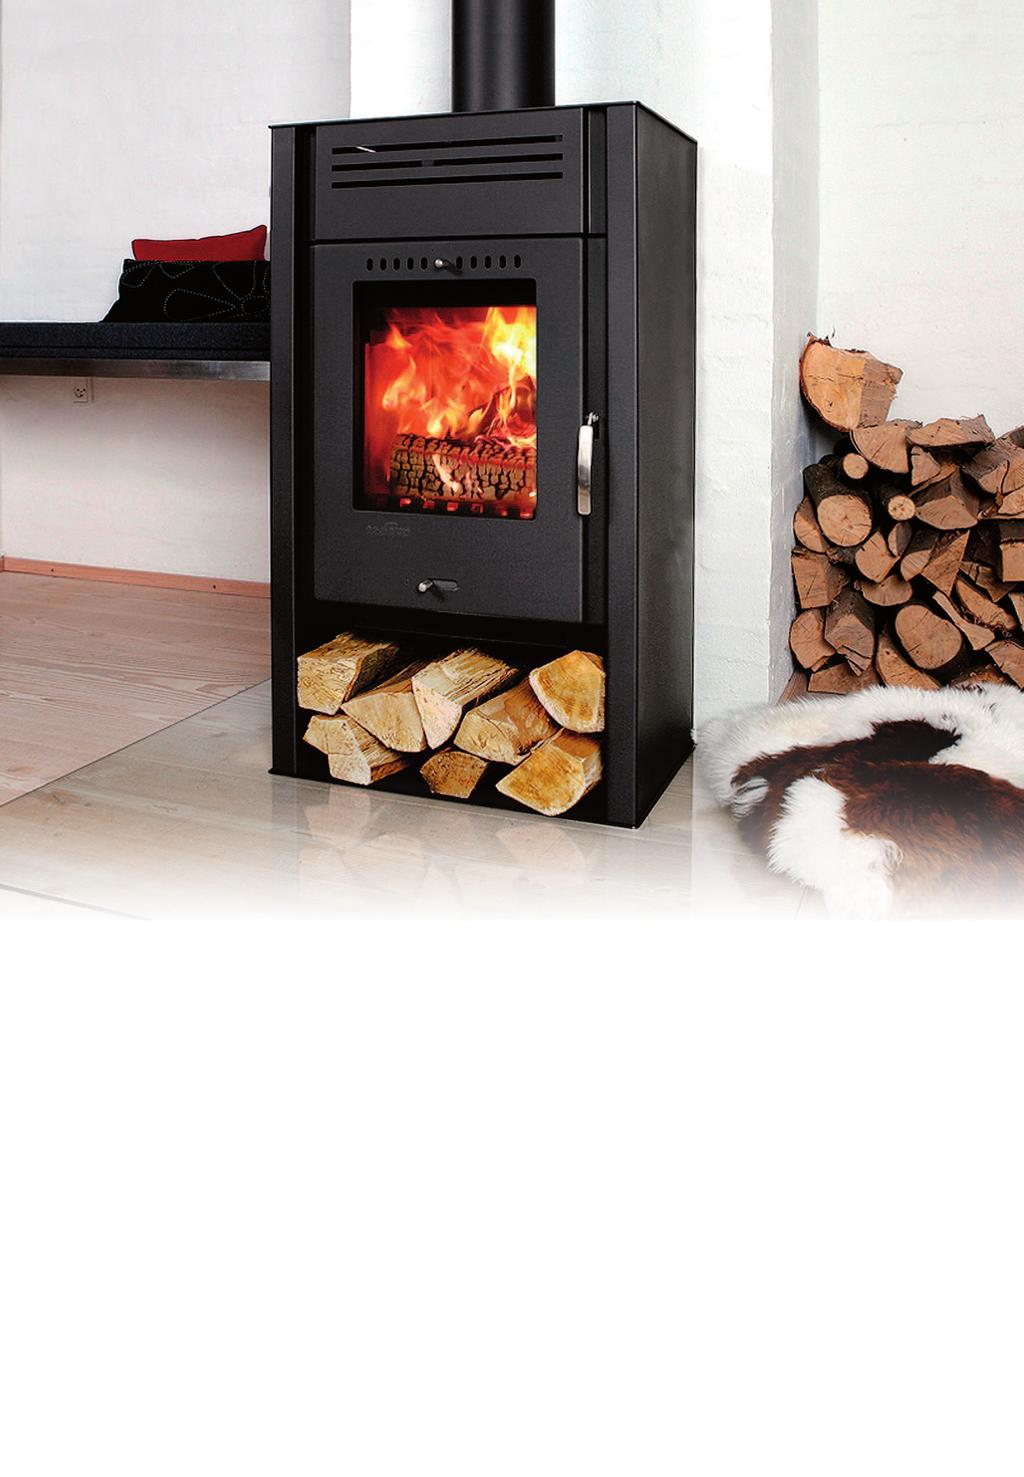 Asgård 1 Nordic Eco-label wood stove in a simple design with effective combustion.